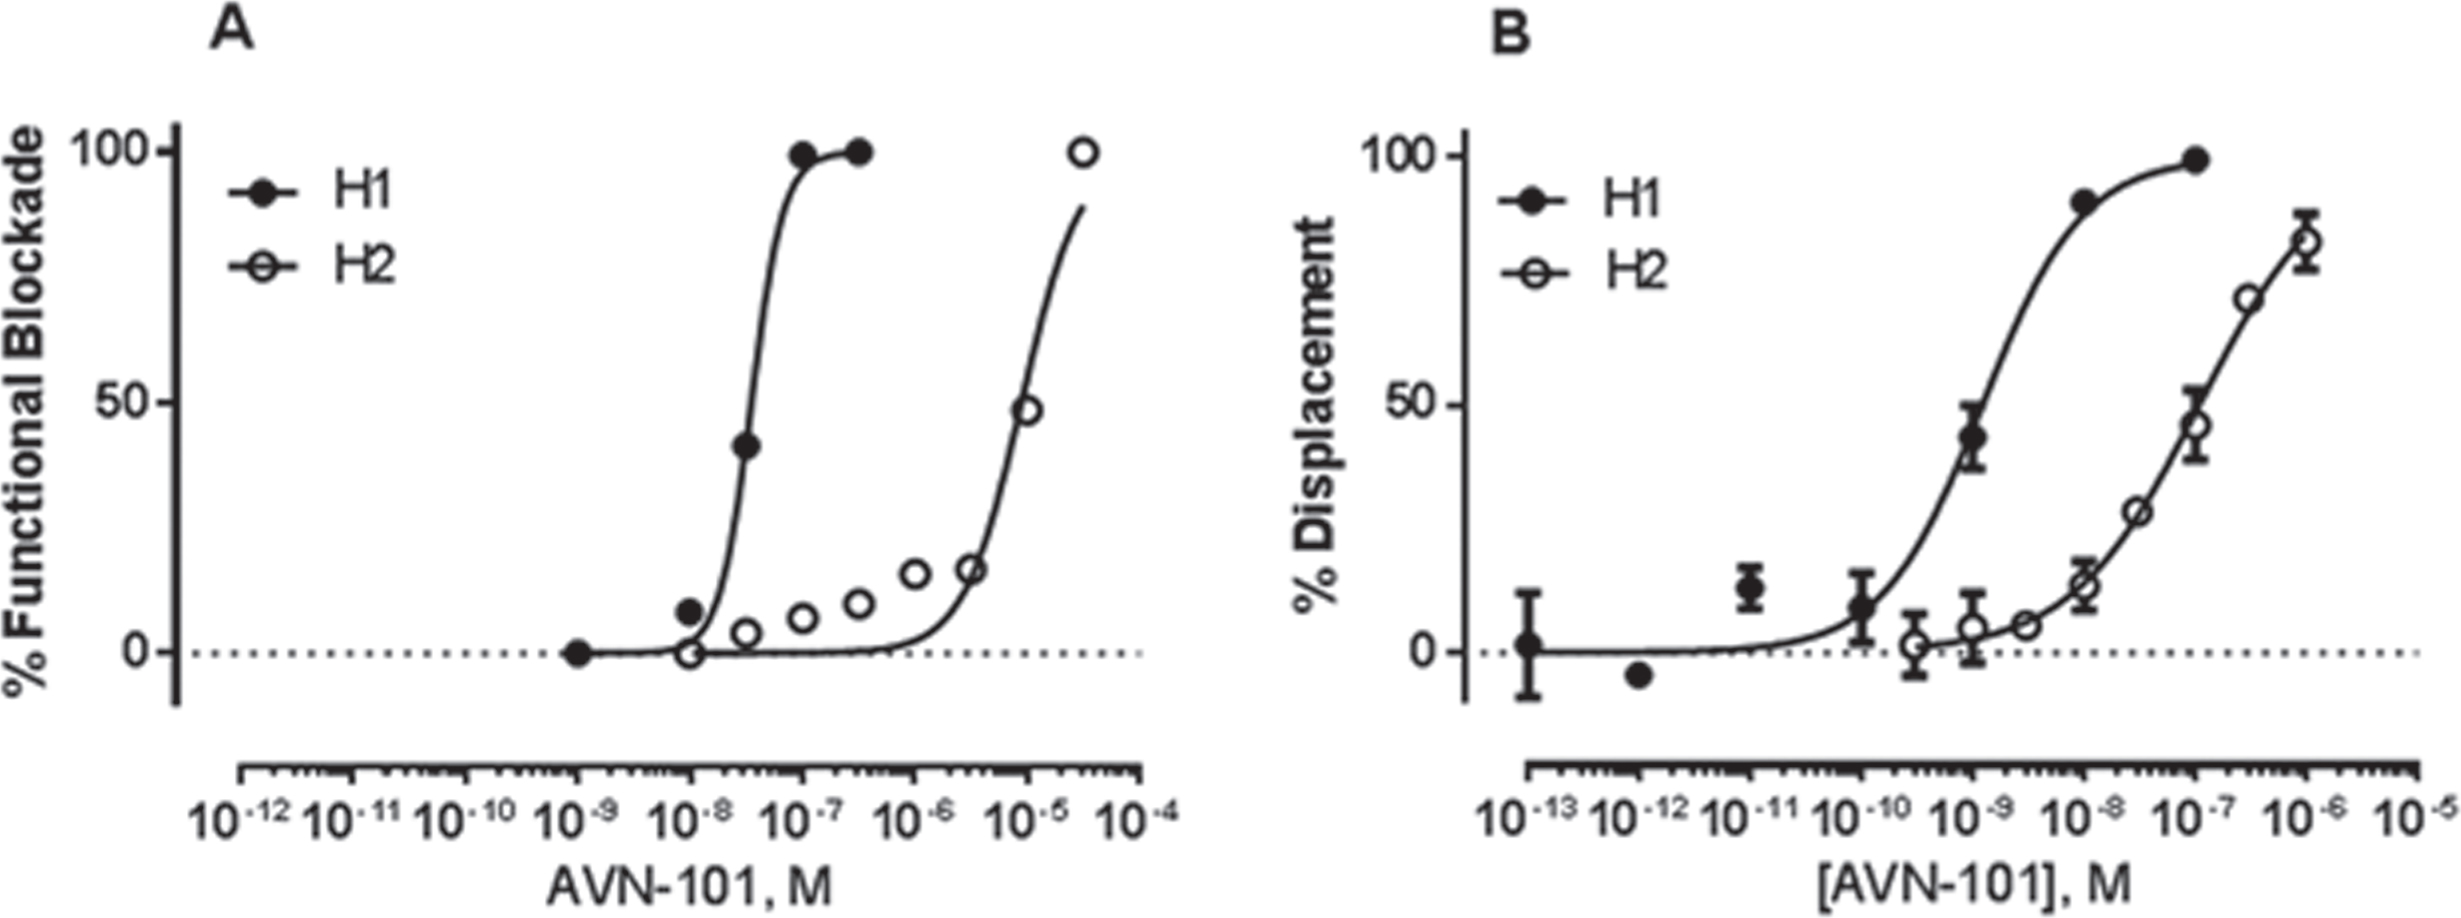 A) AVN-101-induced blockade of cell responses (SK-N-SH endogenously expressing H1 receptors and CHO-K1 exogenously expressing human recombinant H2 receptors) to corresponding agonists, 10μM histamine and 50 nM amthamine. Histamine induced Ca2 + mobilization in SK-N-SH cells and amthamine induced cAMP accumulation in CHO-1K cells. B) AVN-101 effectively competes for the H1 and H2 receptors, expressed in CHO-K1 cells, with corresponding radio-labeled ligands, 1.2 nM [3H]Pyrilamine and 0.1 nM [125I]Aminopotentidine.